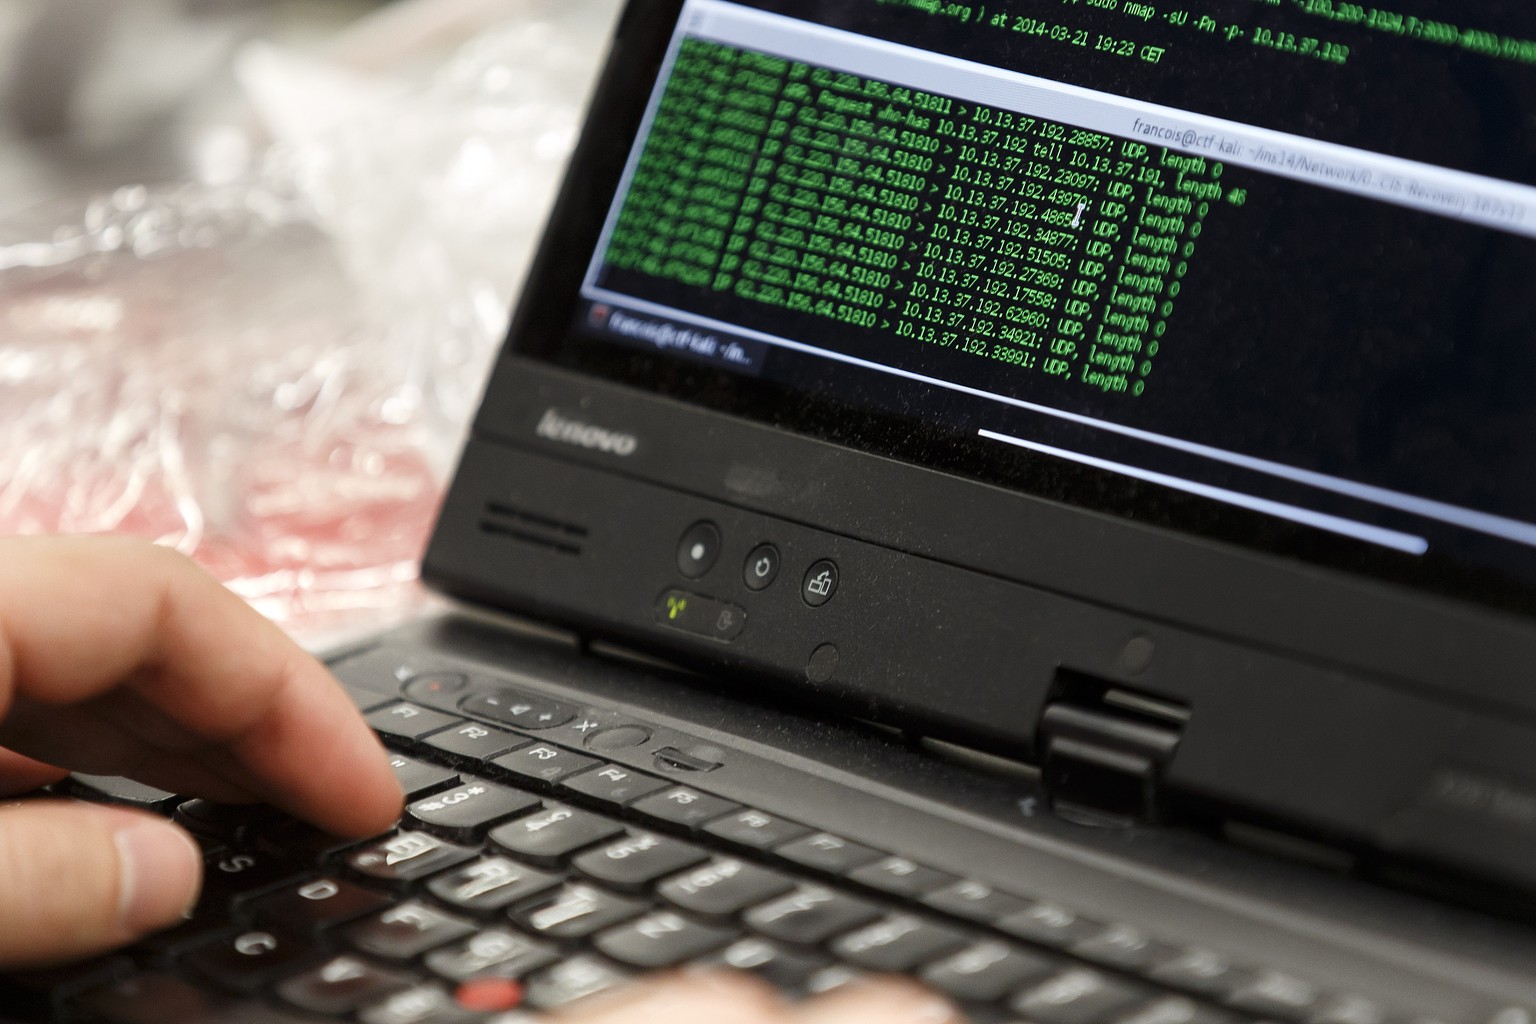 Hackers try to break the security oriented challenges during an ethical hacking contest at the 7th edition of &quot;Insomni&#039;hack - Swiss security conference and ethical hacking contest&quot;, in  ...